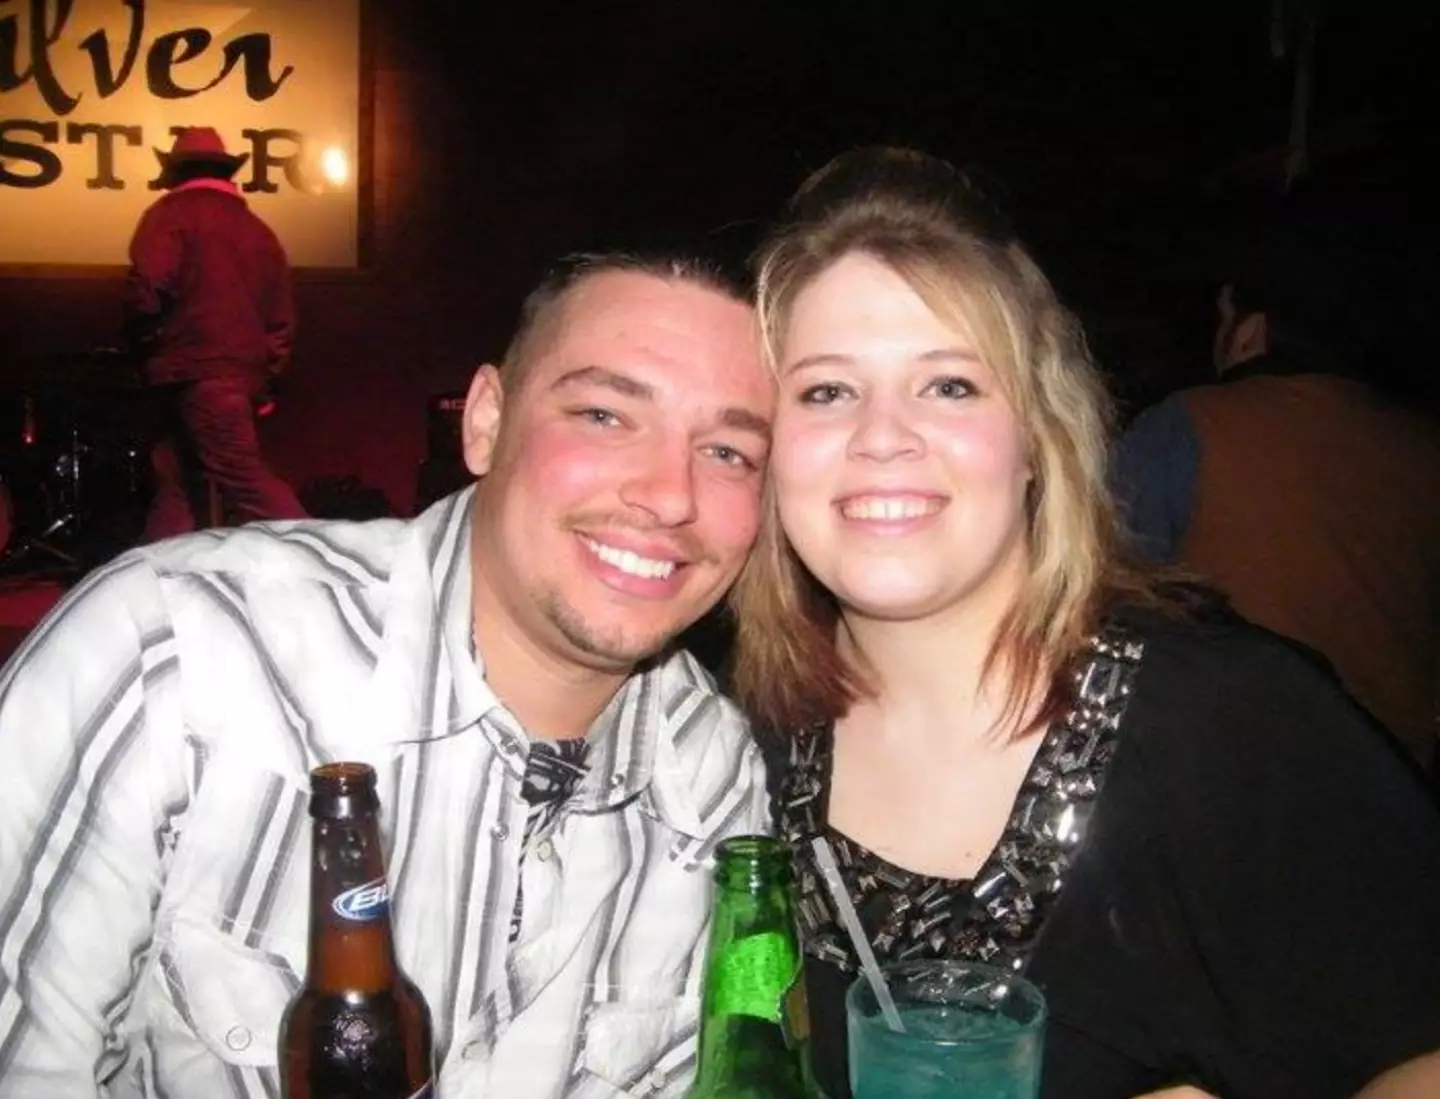 Brandon Lawson (pictured with his wife, Ladessa) has been missing since 2013.